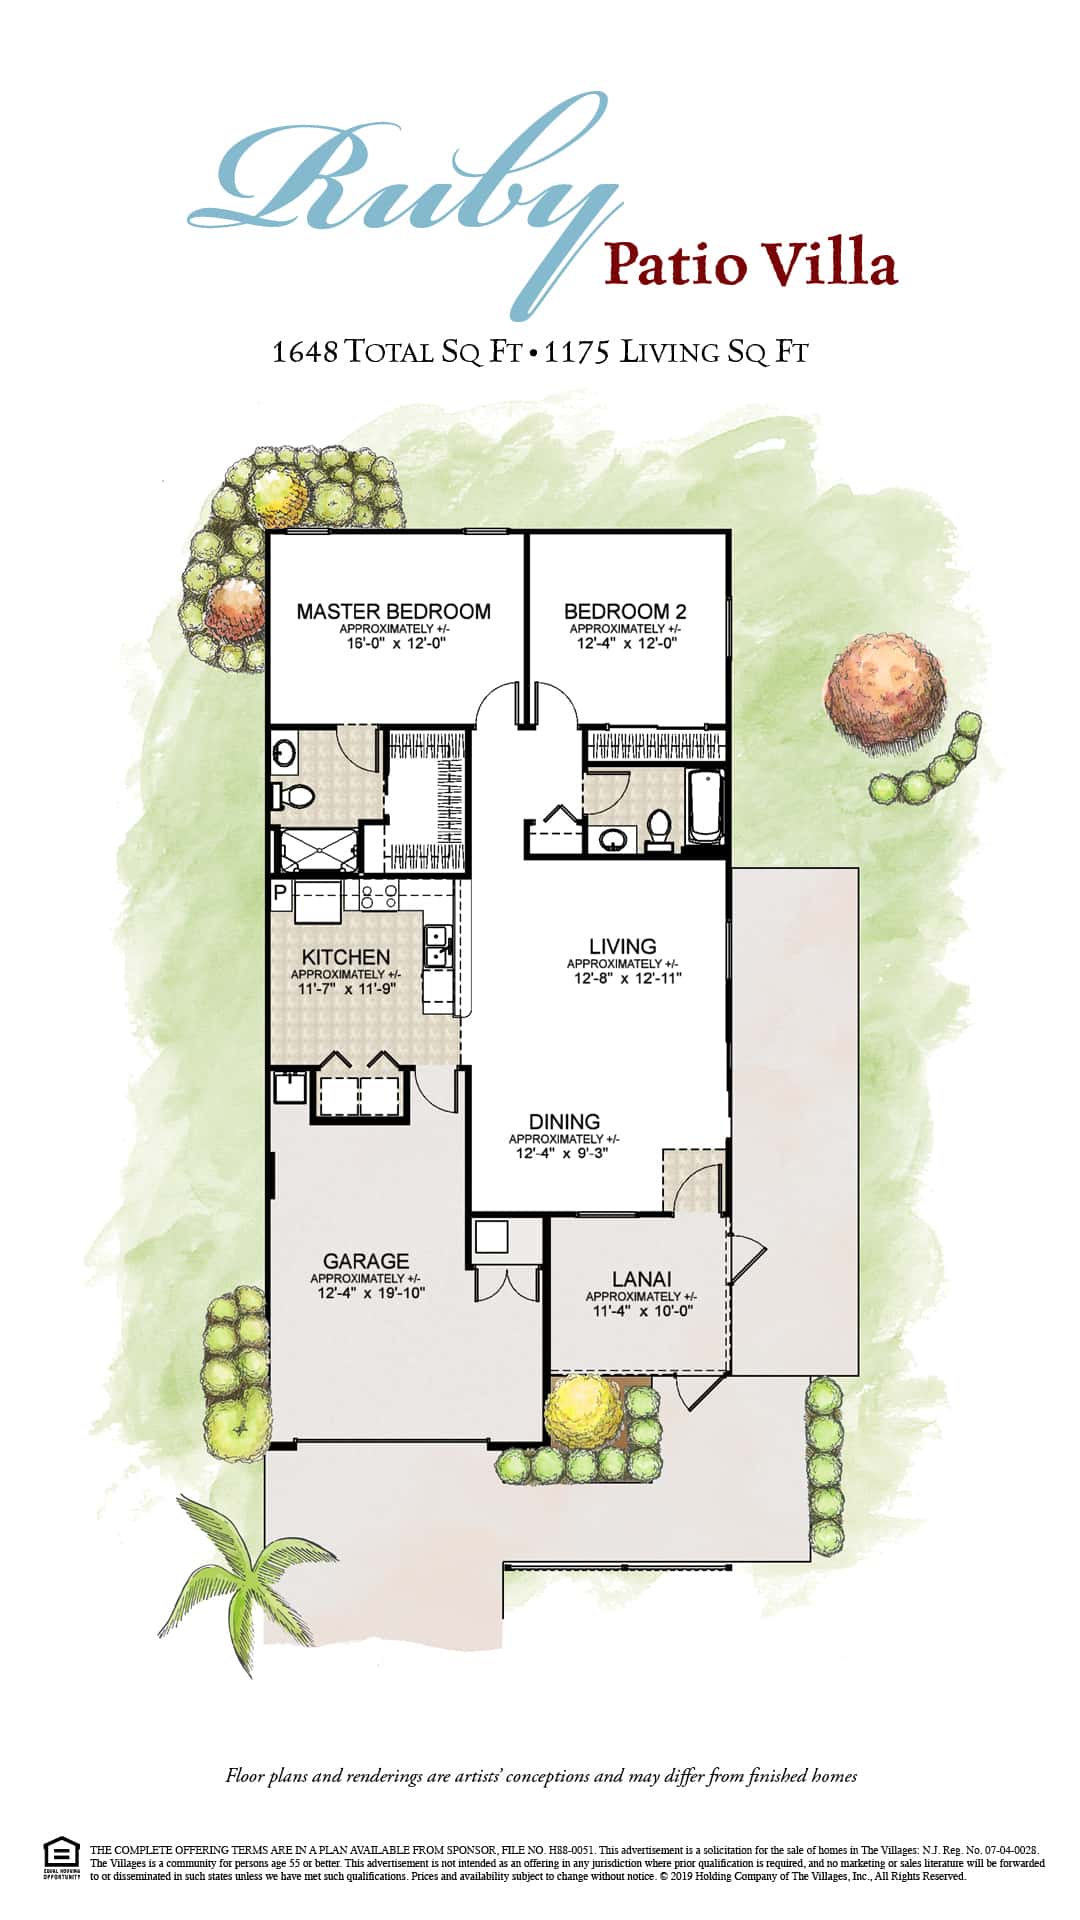 The Villages Home Floor Plans - Image to u